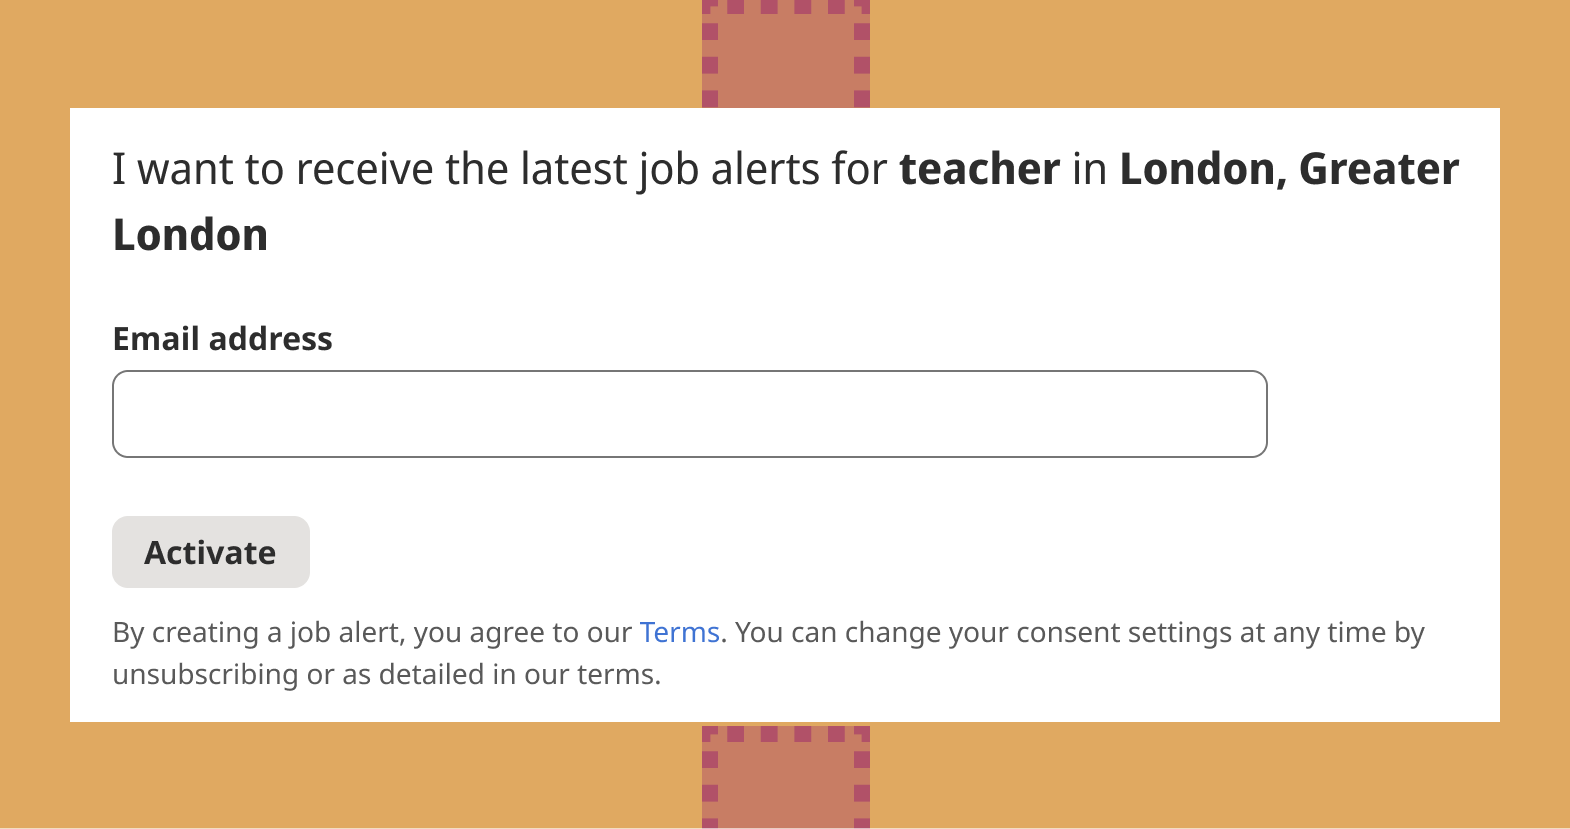 Image showing text box to enter email address and activate job alert.